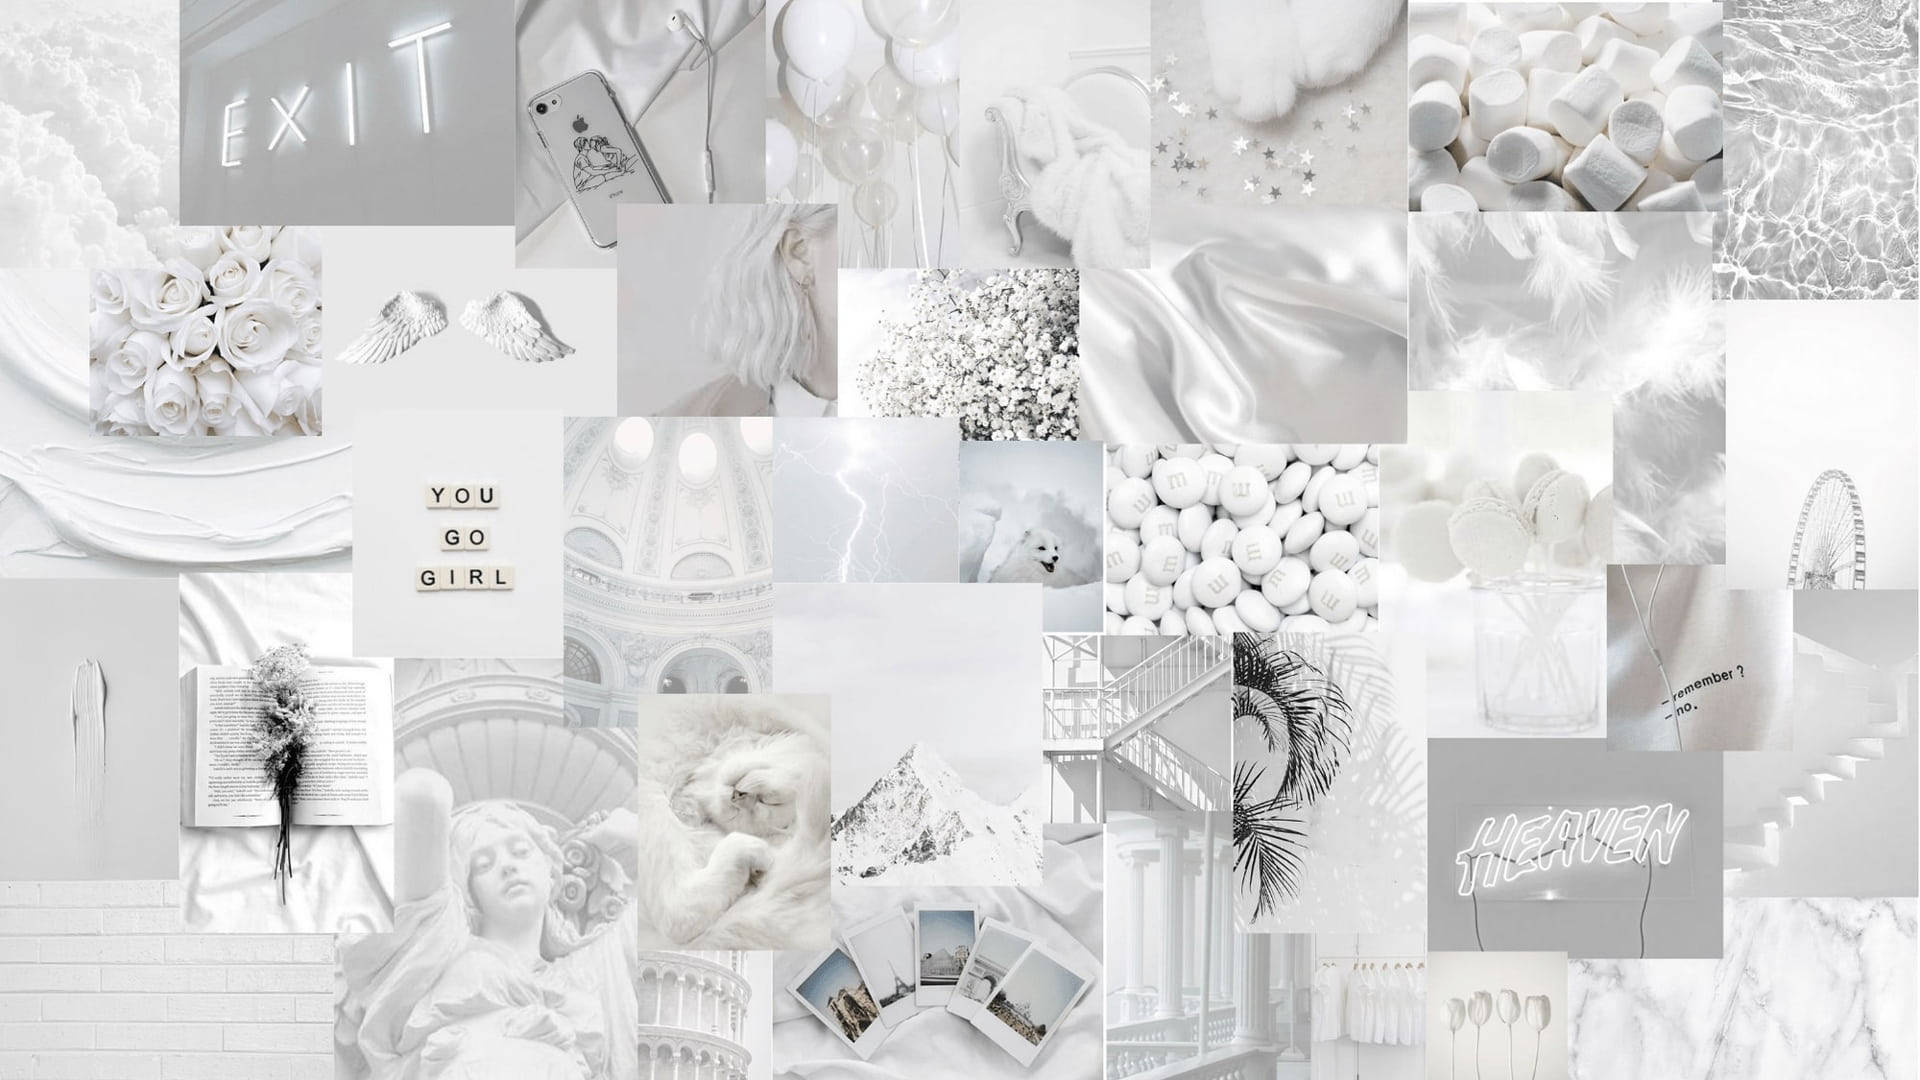 Image Collage In Cute White Aesthetic